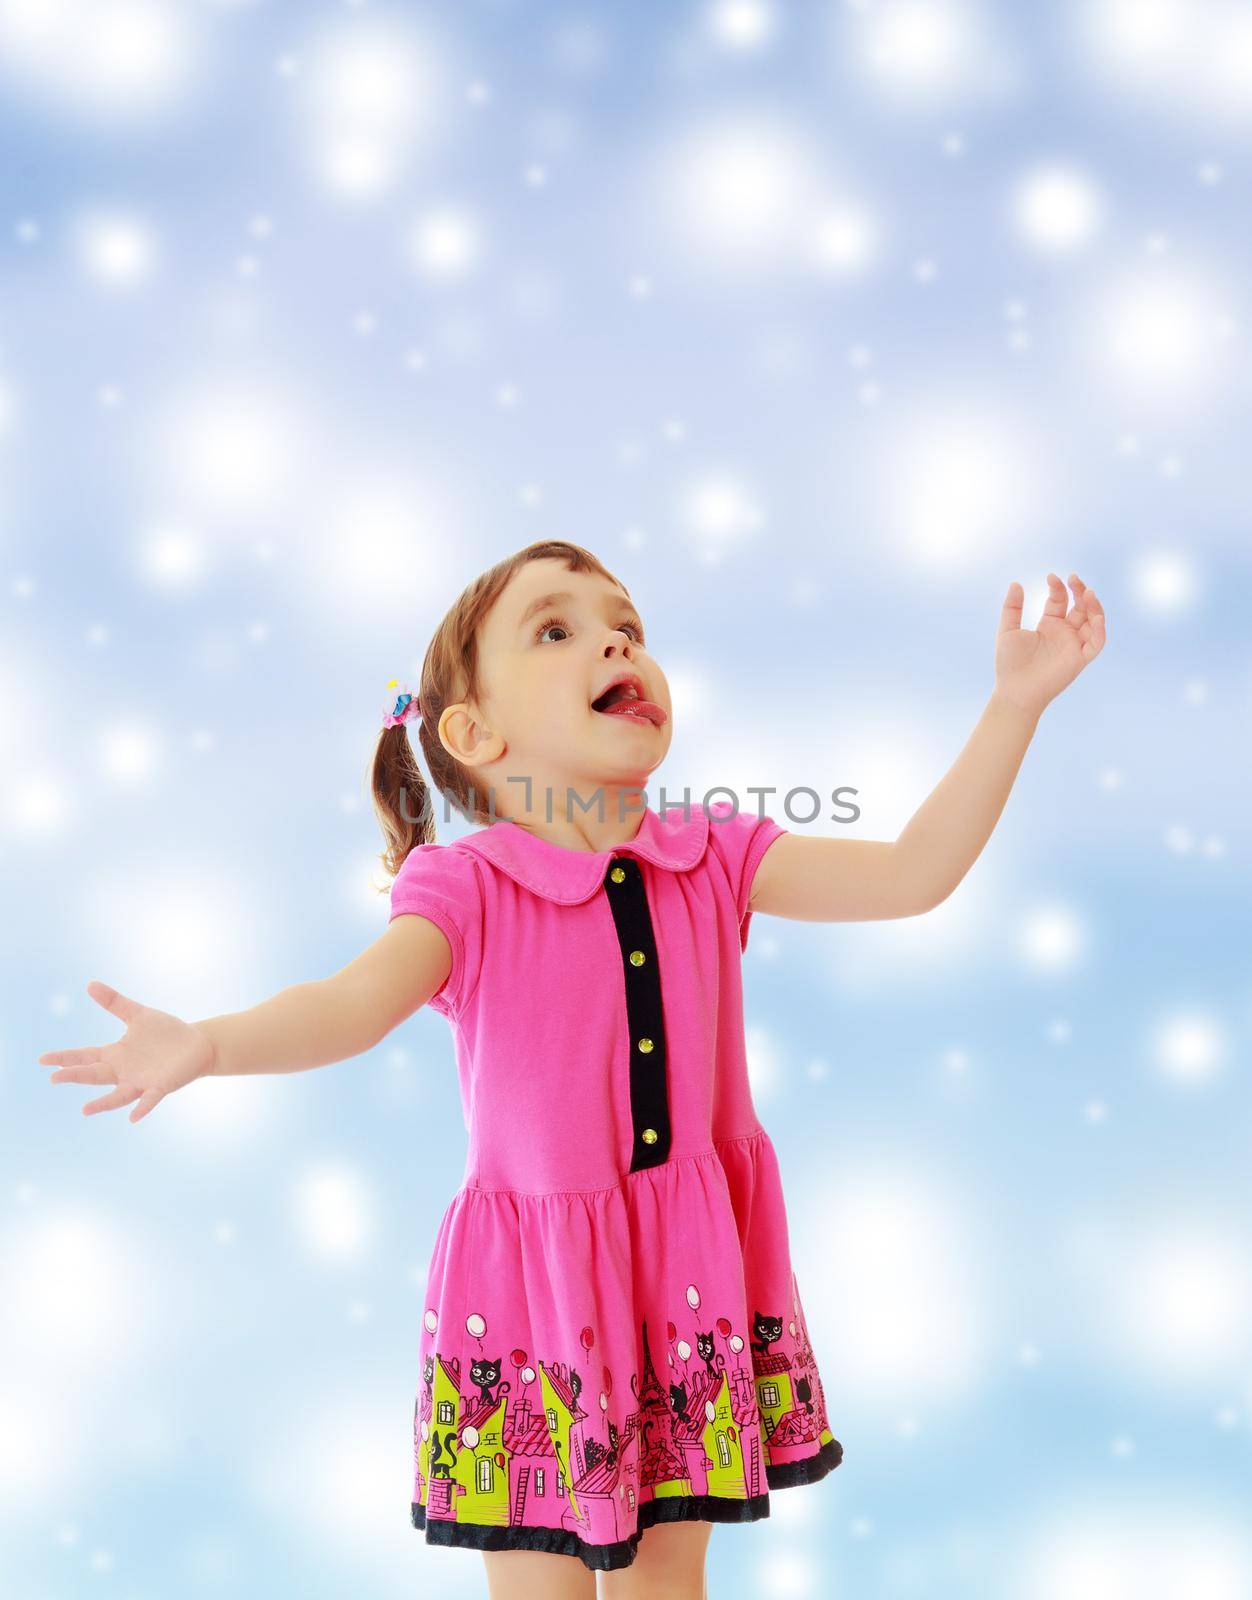 Surprised little girl raised his head up and gesturing with his hands. Close-up.On new year or Christmas blue background with white big stars.